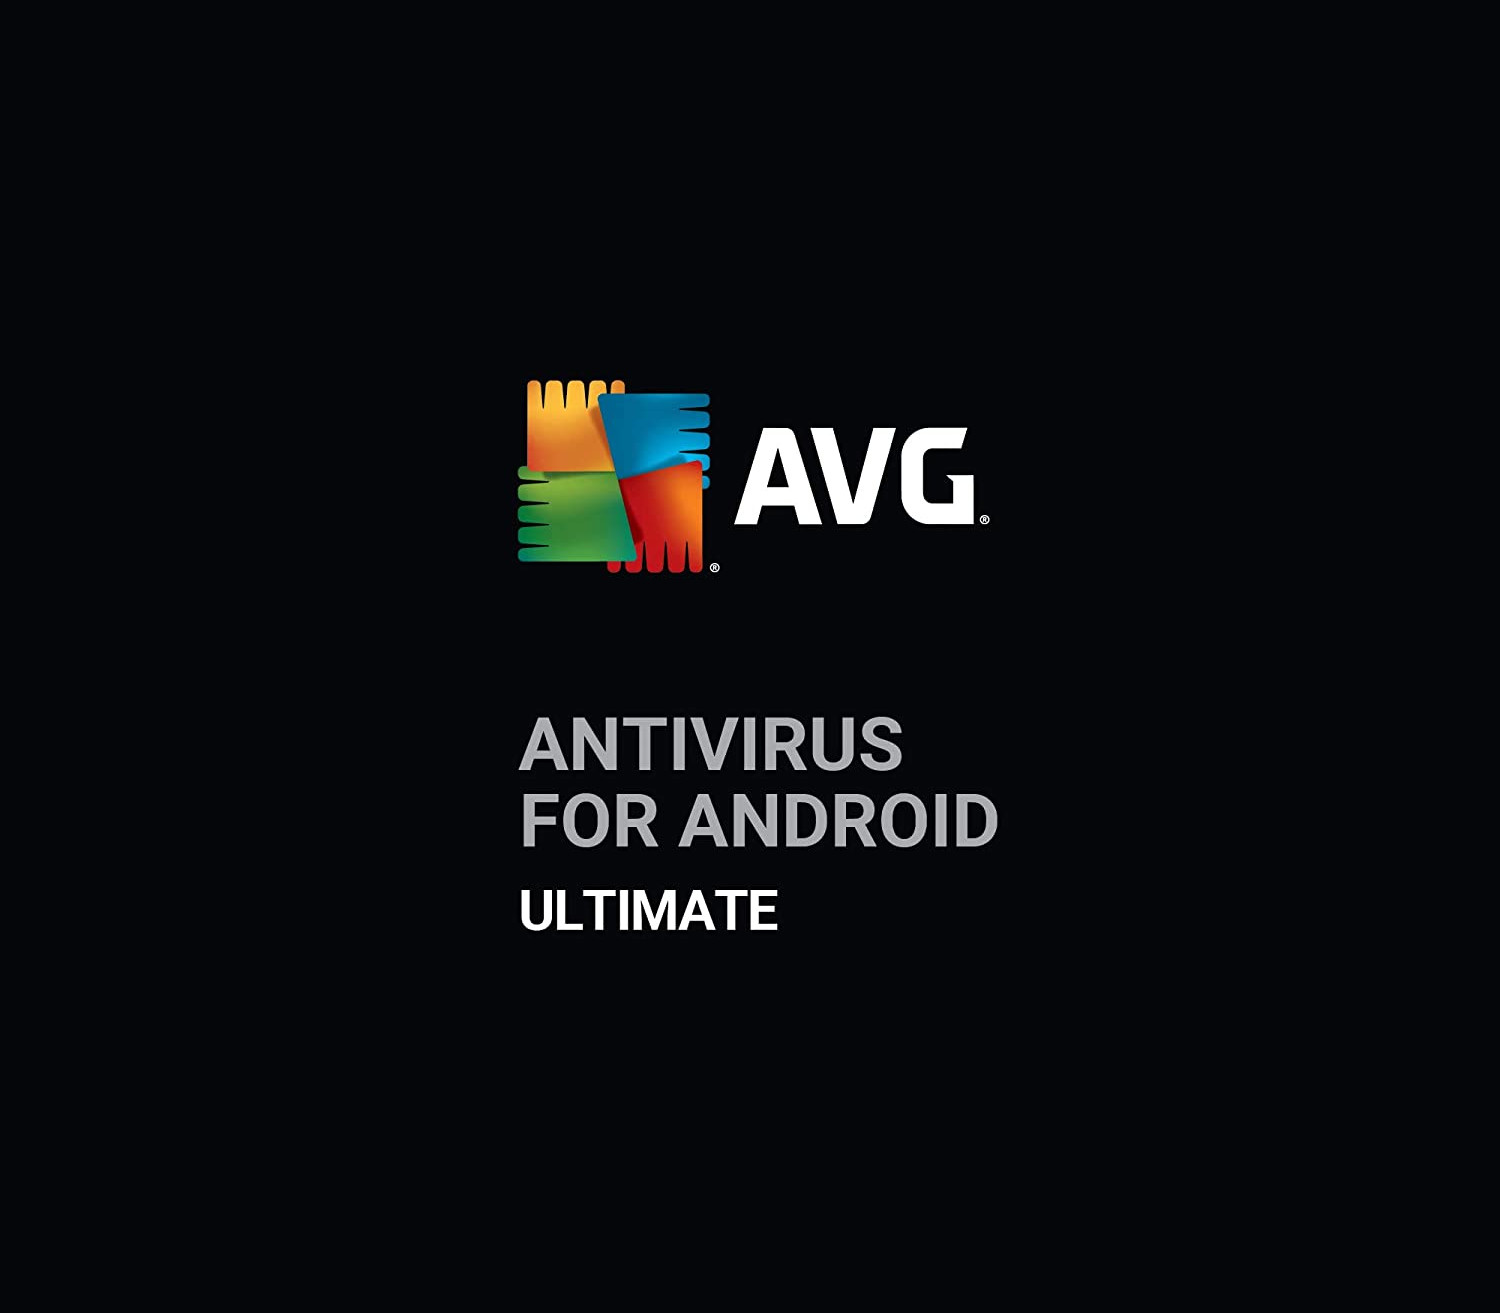 AVG Antivirus for Android - Ultimate Key (1 Year / 1 Device) 6.84$